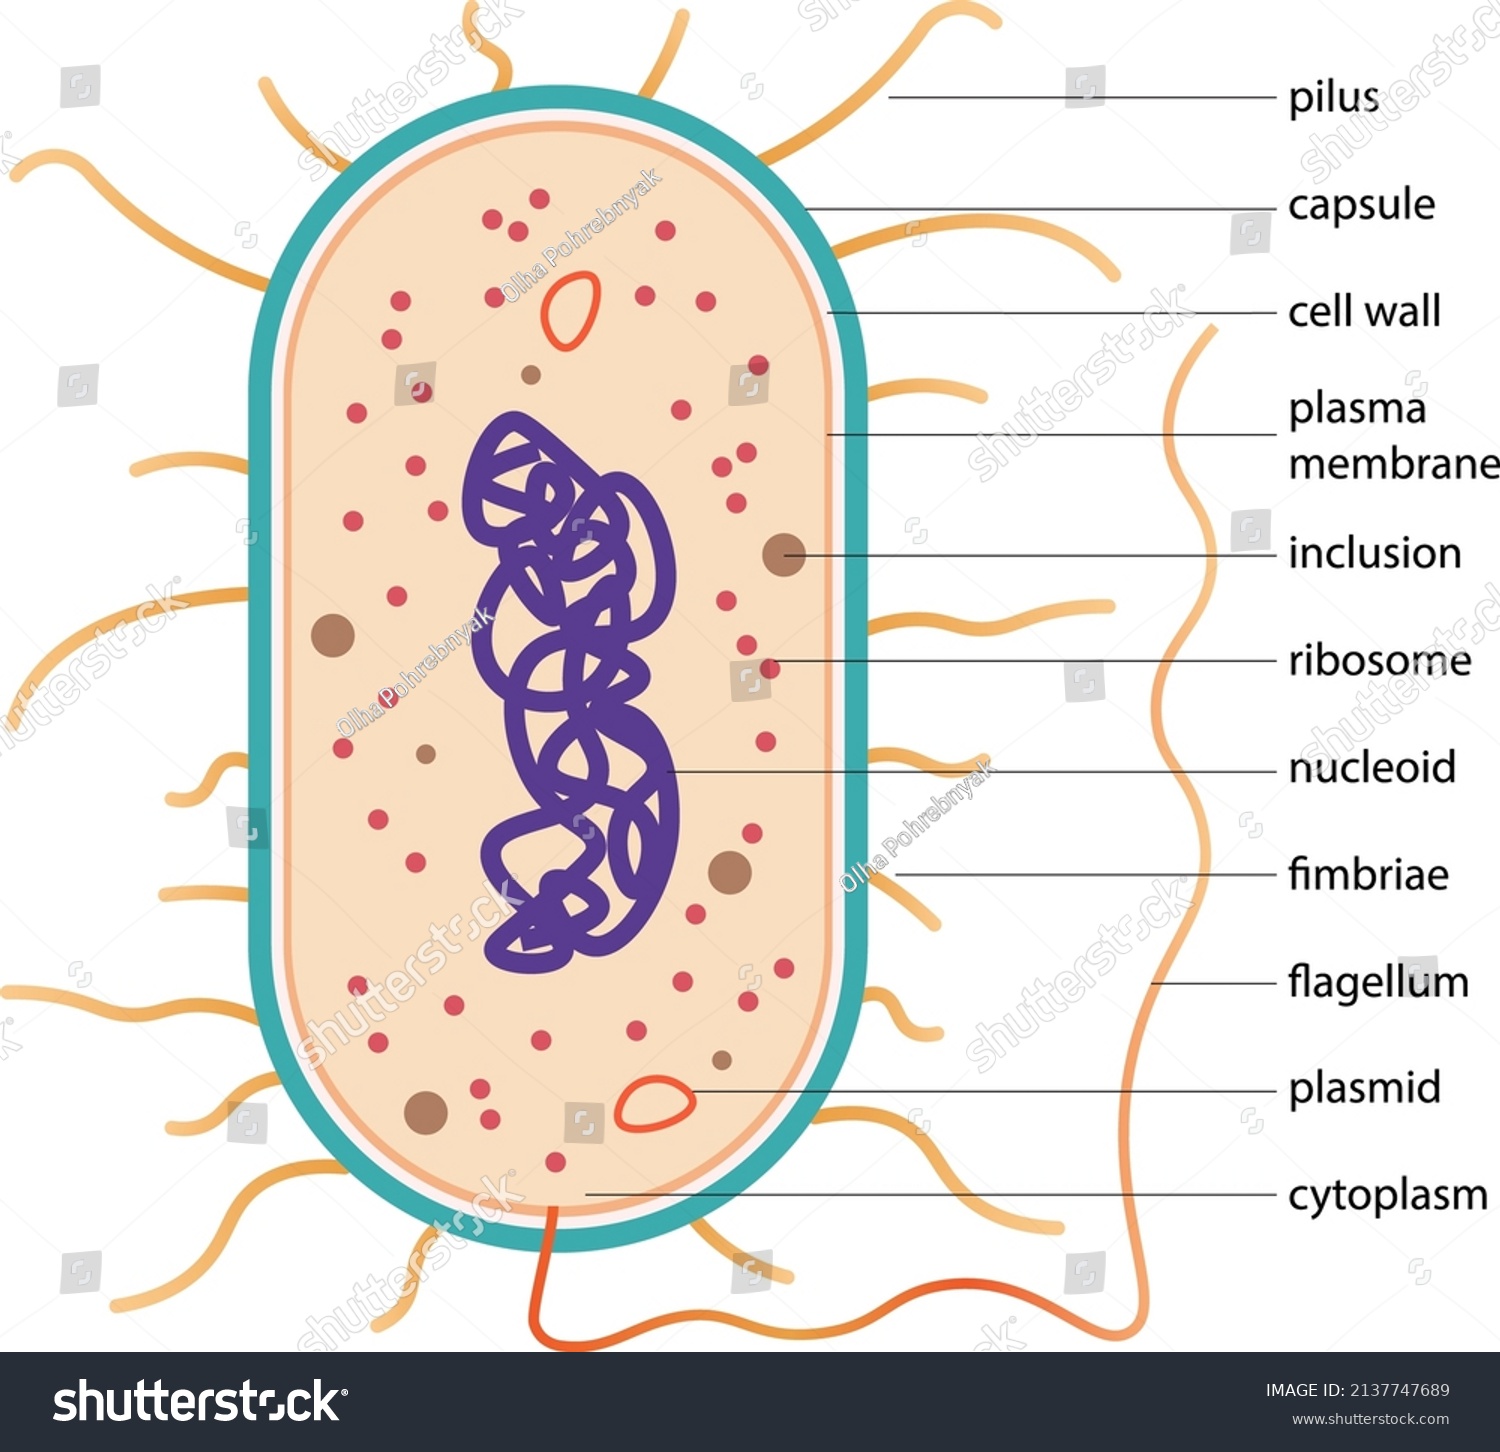 Typical Prokaryotic Cell Scheme Typical Bacteria Stock Vector Royalty Free 2137747689 7869